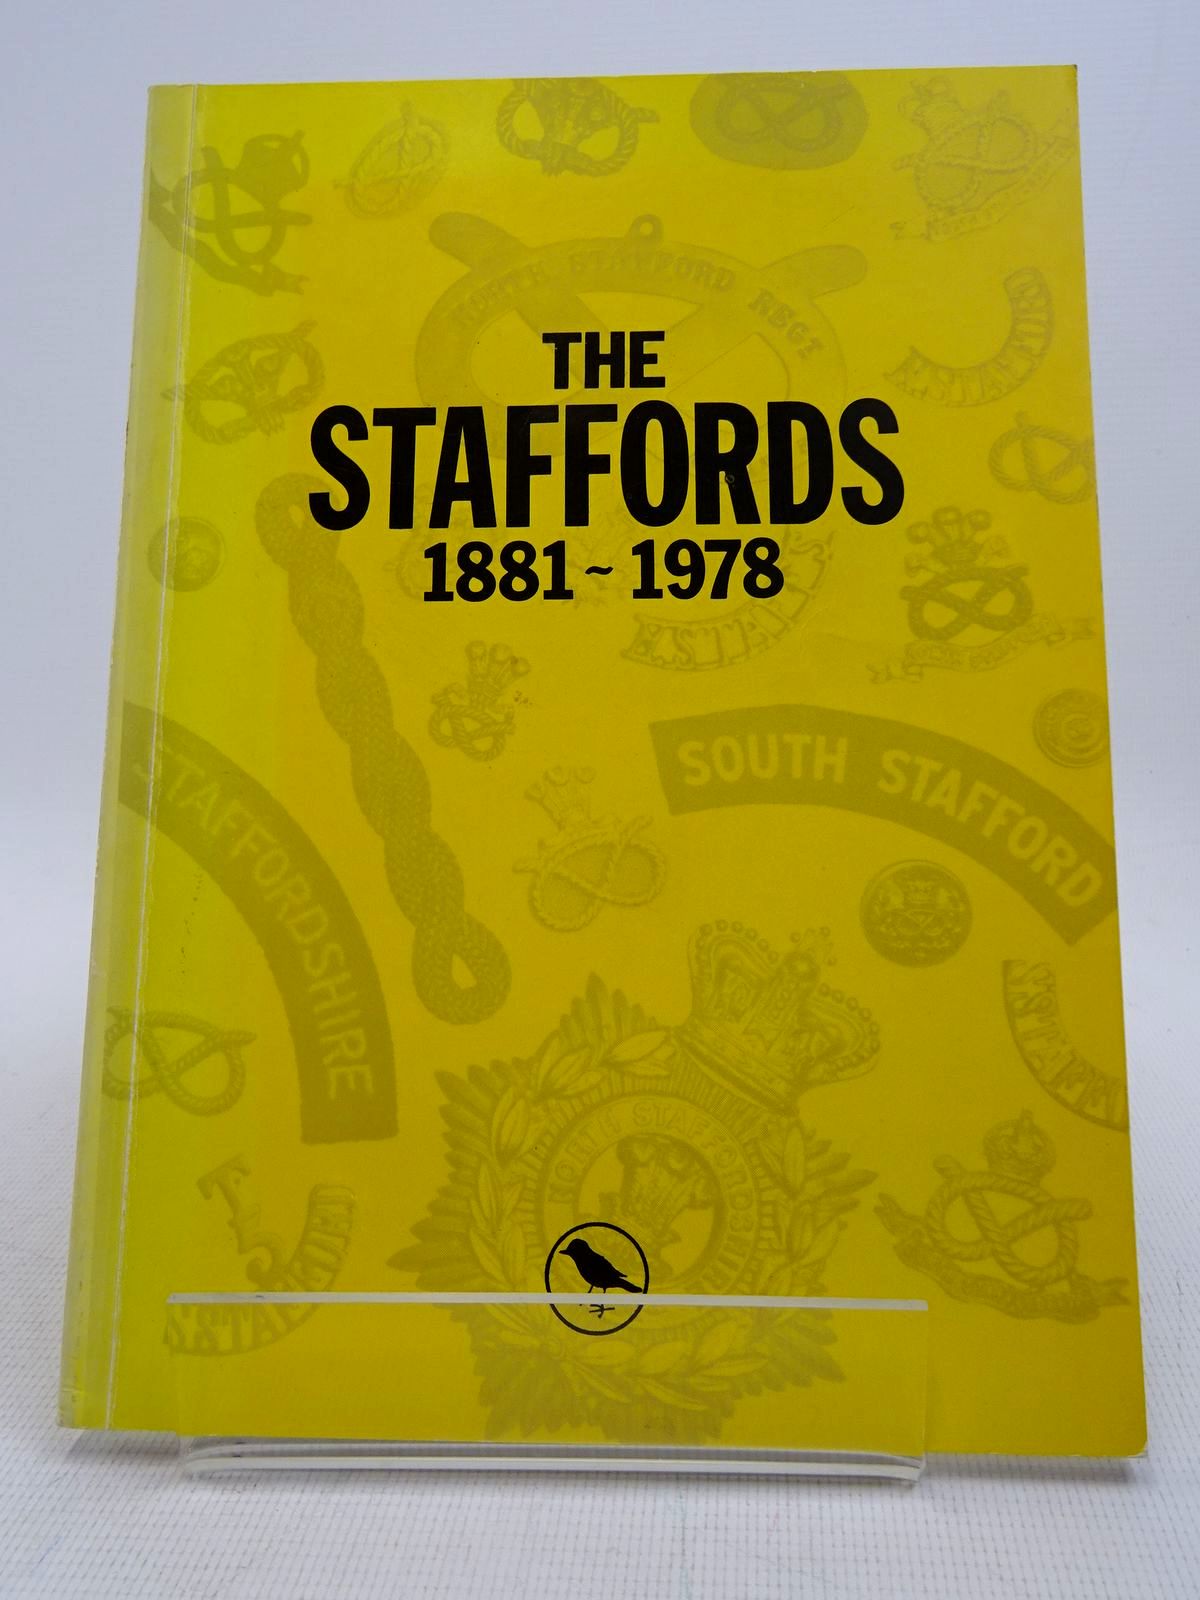 Photo of THE STAFFORDS 1881 - 1978 BADGES AND UNIFORMS written by Rosignoli, Guido Whitehouse, C.J. published by Rosignoli (STOCK CODE: 1817166)  for sale by Stella & Rose's Books